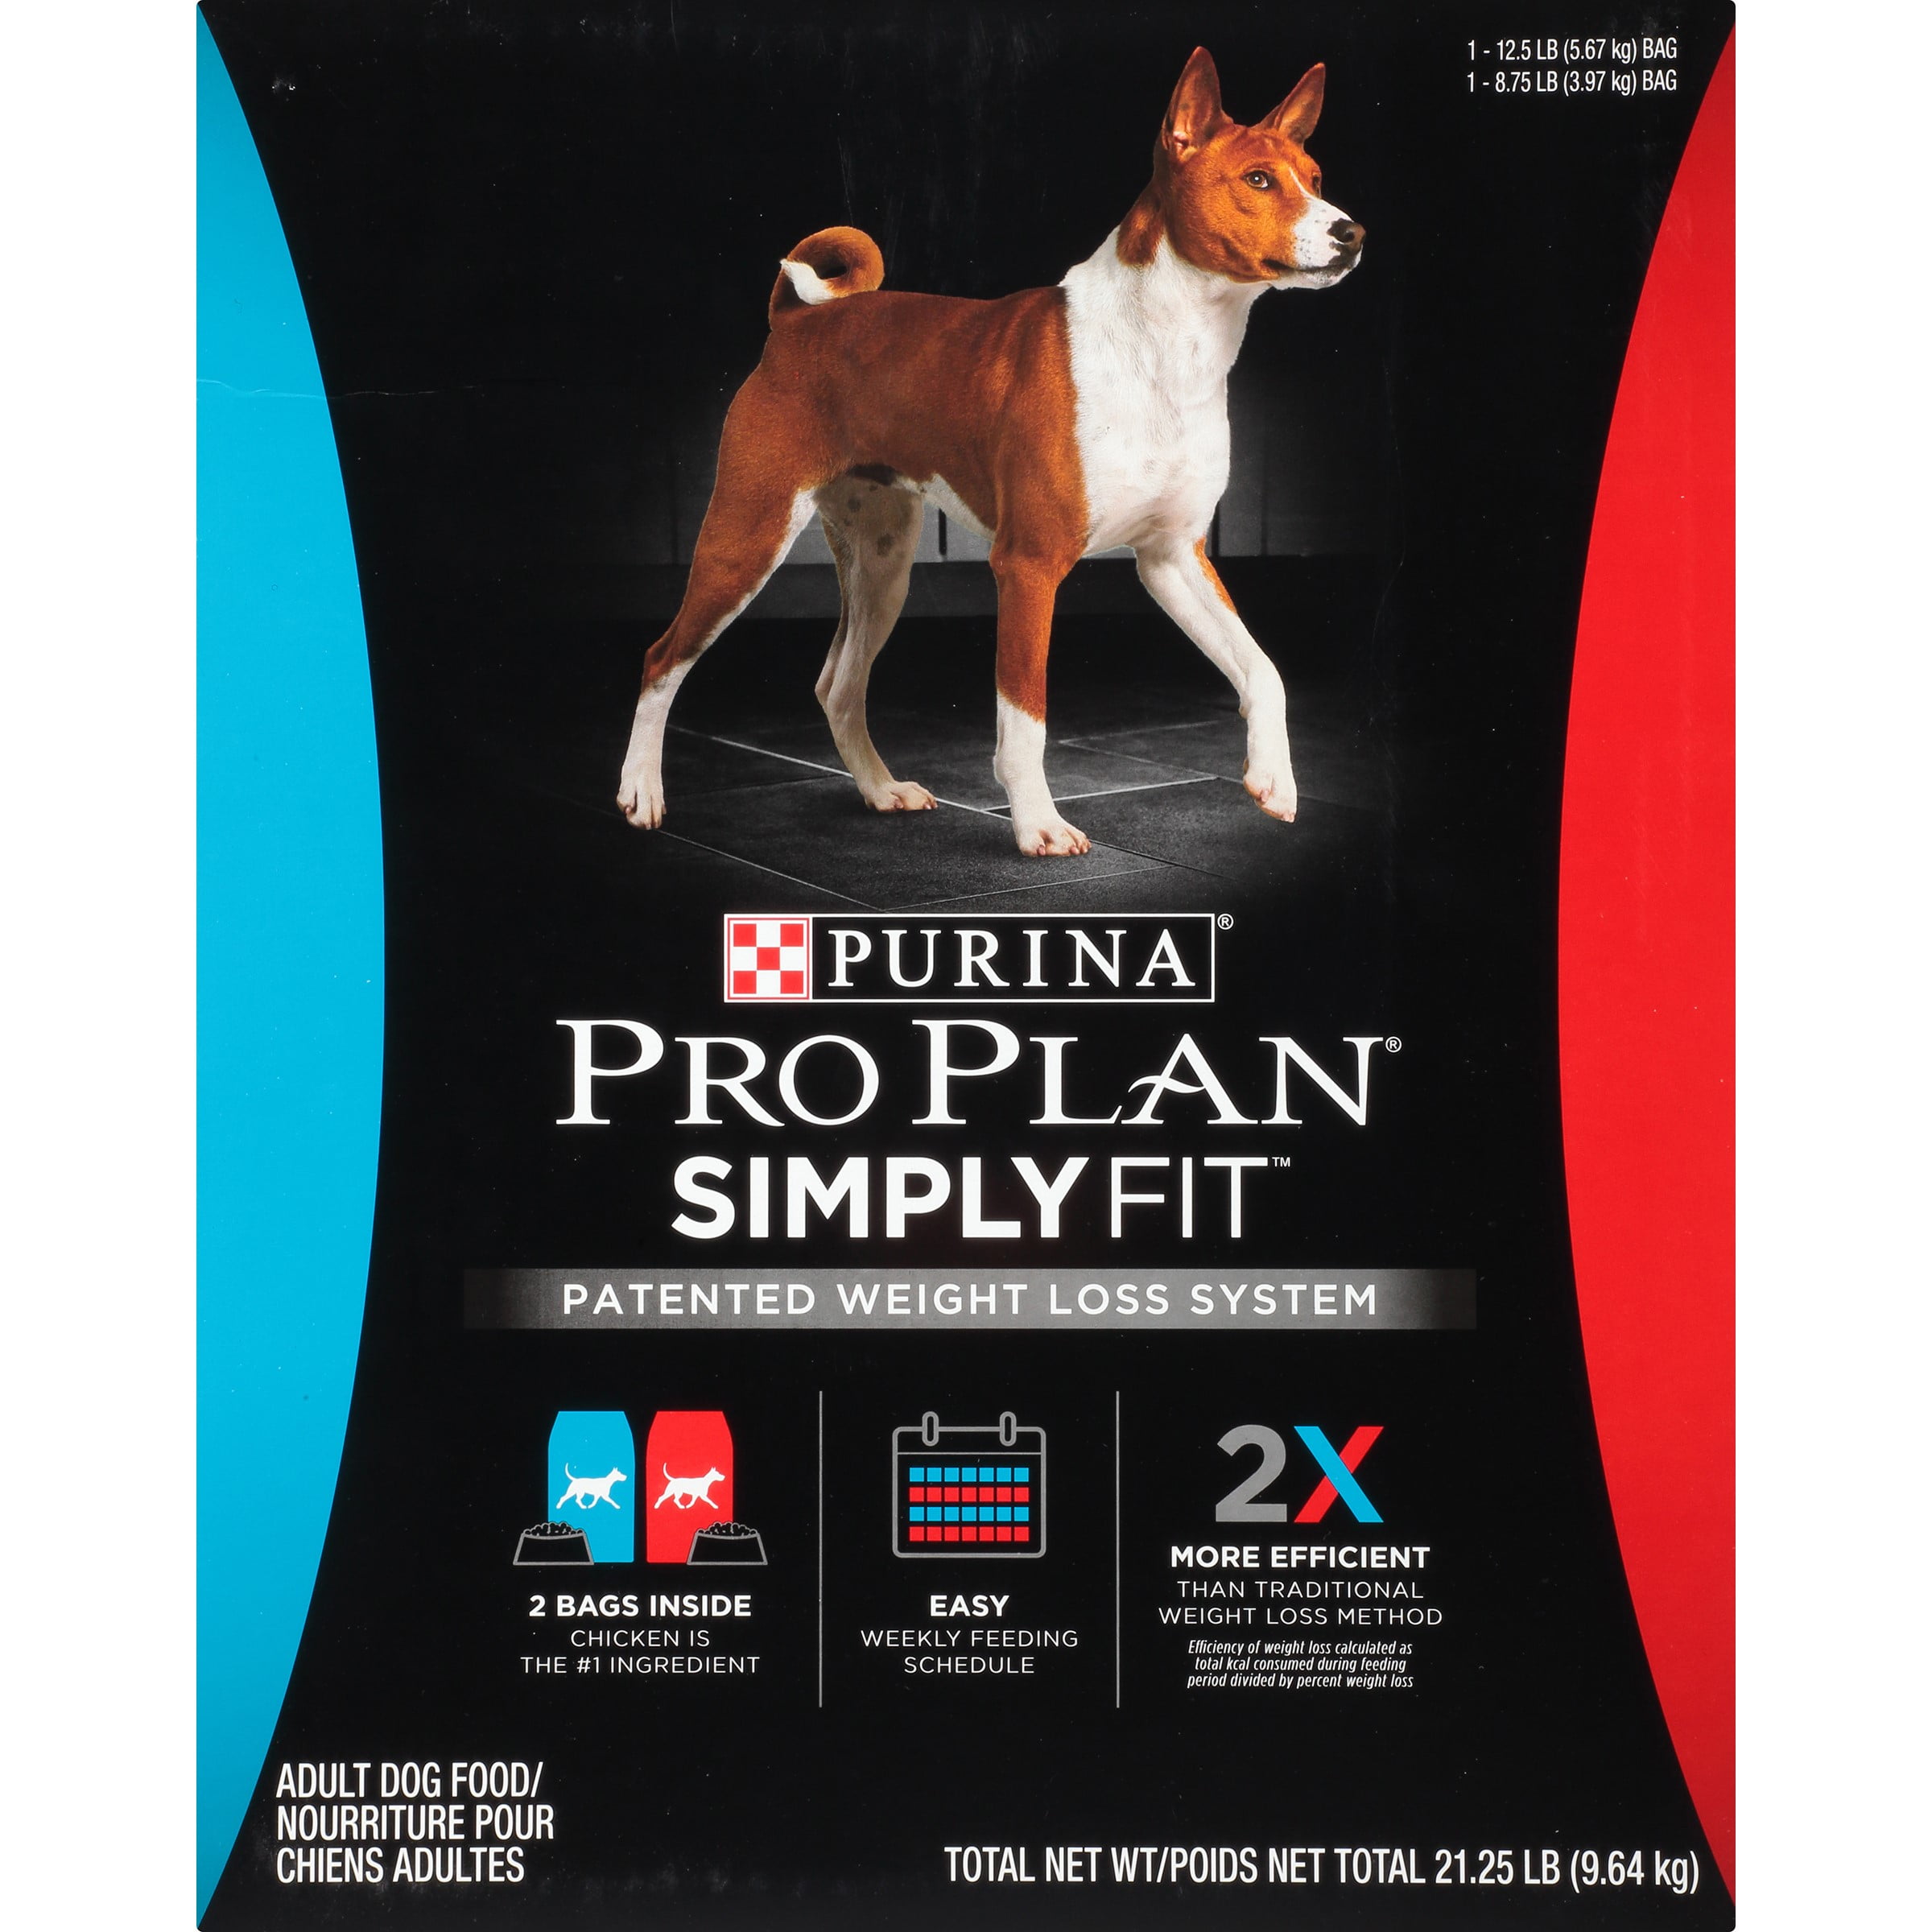 Purina Pro Plan SIMPLY FIT Patented 